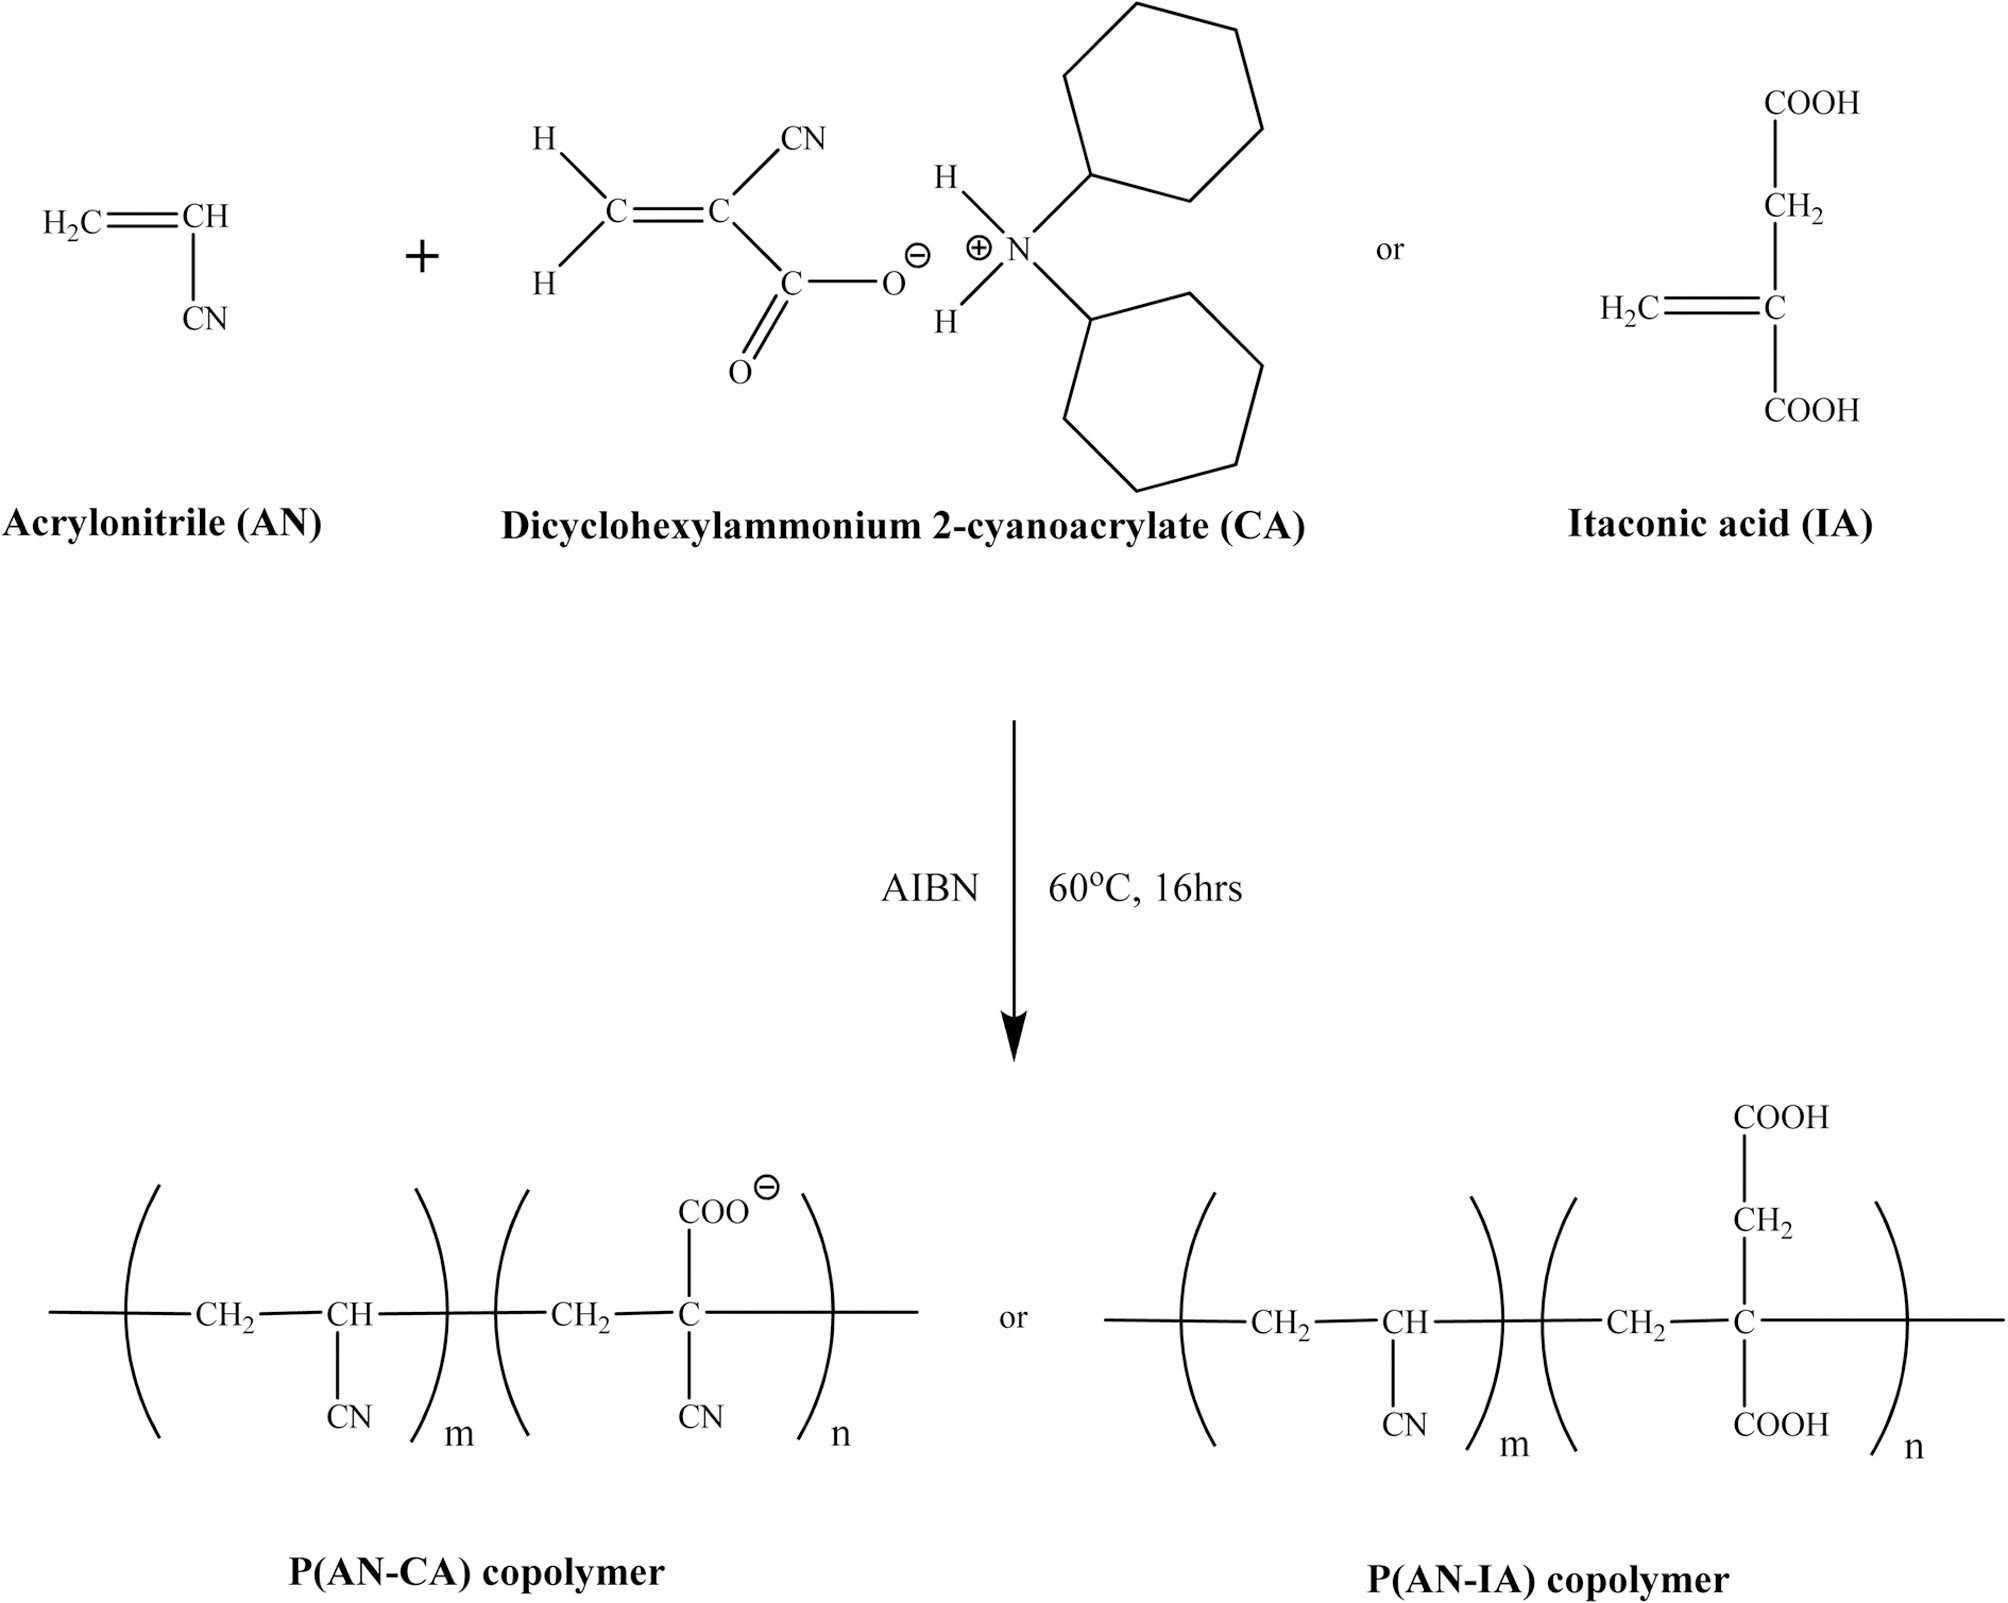 Polymerization scheme for P(AN-CA) and P(AN-IA)copolymers.